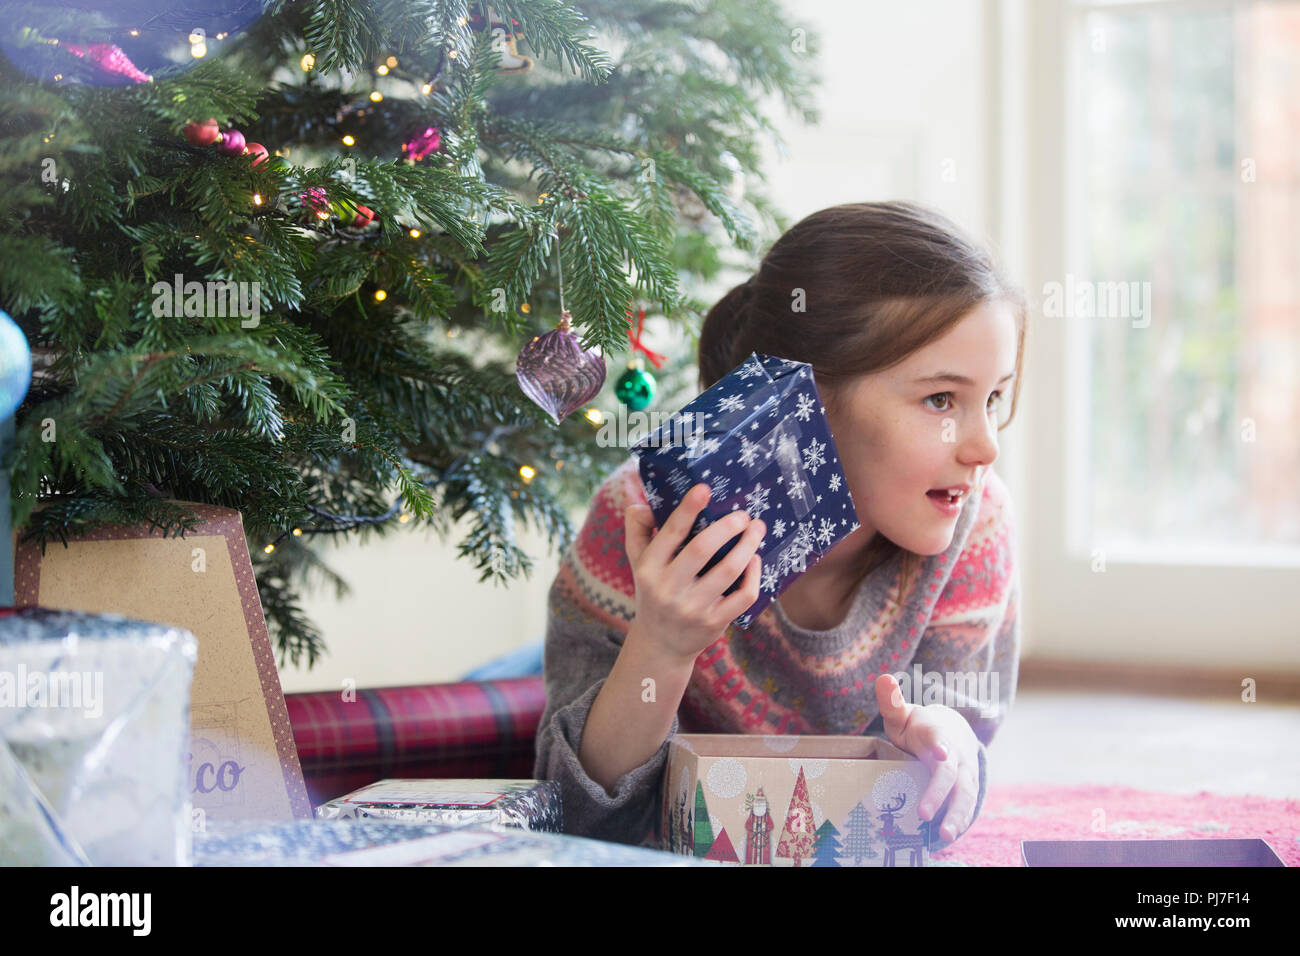 Curieux girl shaking Christmas Gift Banque D'Images